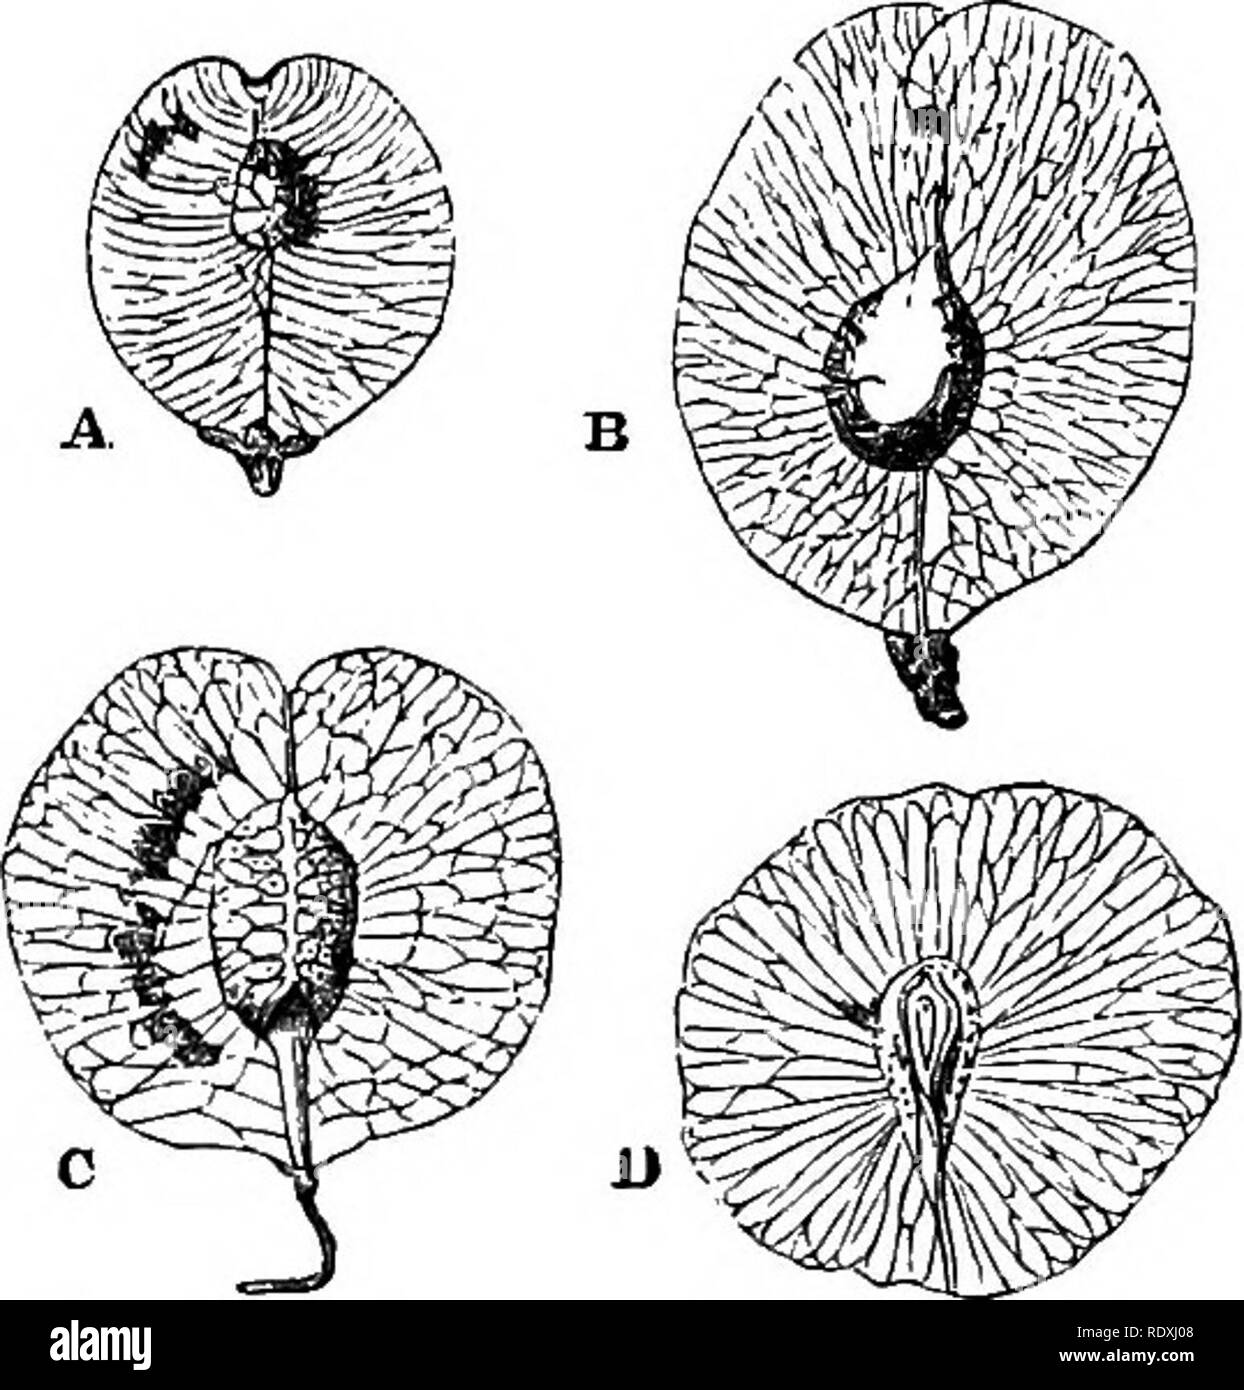 . Freaks and marvels of plant life; or, Curiosities of vegetation. Plant anatomy. MIMICRY. 333 the species are mostly South American. This is represented by Heteropterys laurifolia (fig. 74) ; and- yet again in the Phytolaccacees, the same kind of samara is found in at least two genera, of which we have illustrated Gallesia goranema and Seguiera fioribunda. These four illustrations are from three natural orders, all separate from each other and from the maples, and yet, not only is the size and form the same, but also the veining in the wings. So deceptive is the resemblance between these frui Stock Photo